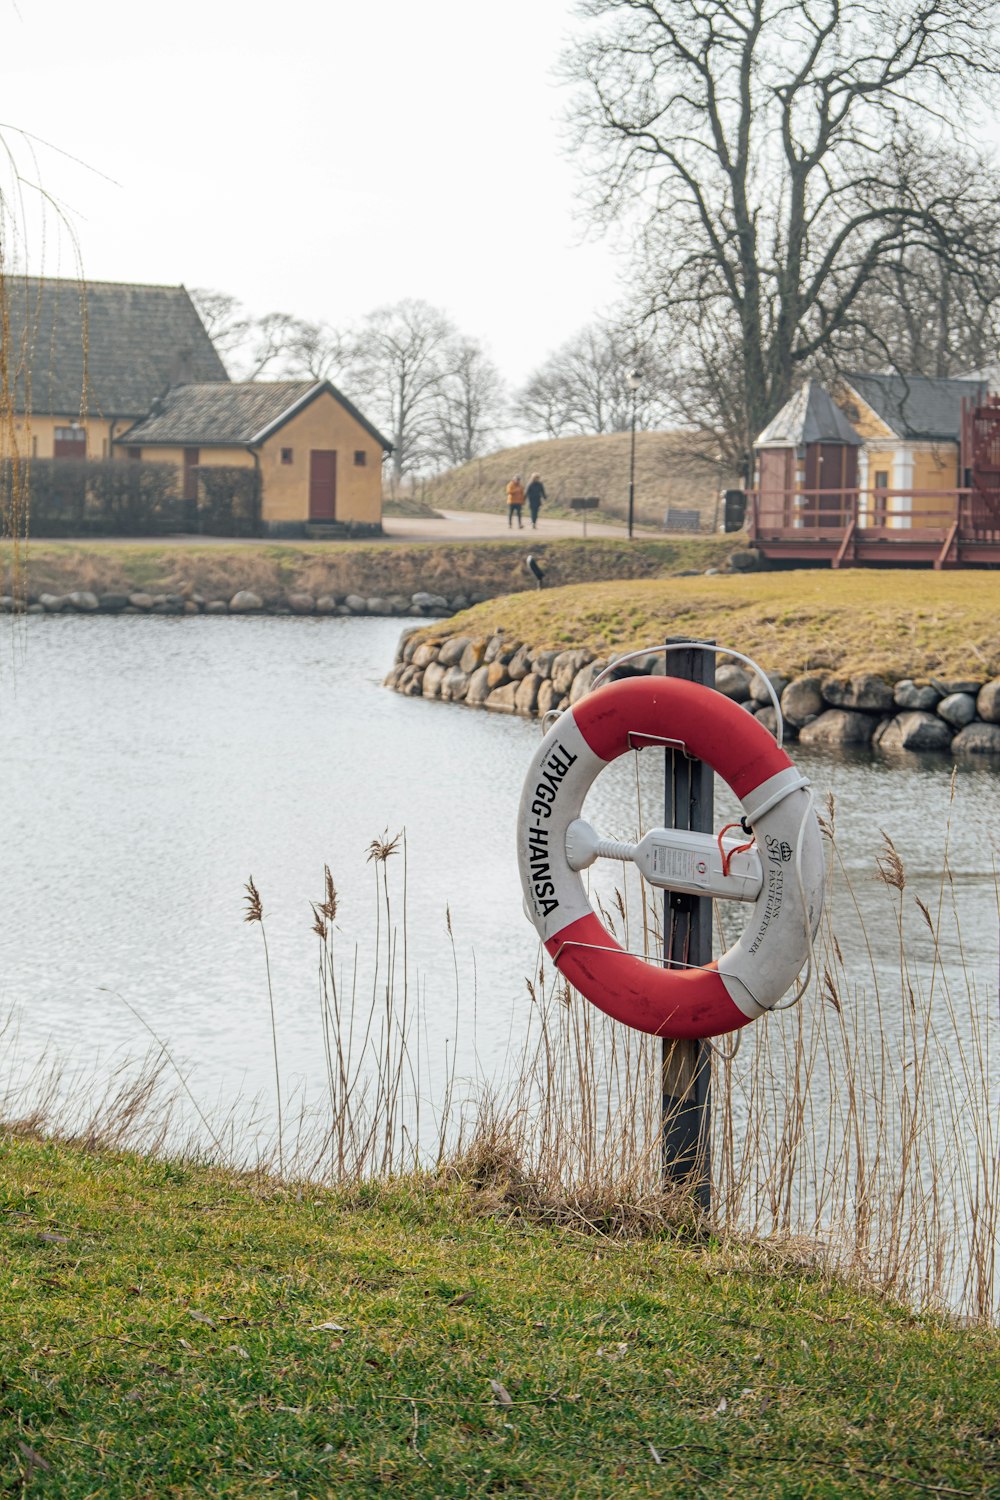 a life preserver on the side of a body of water